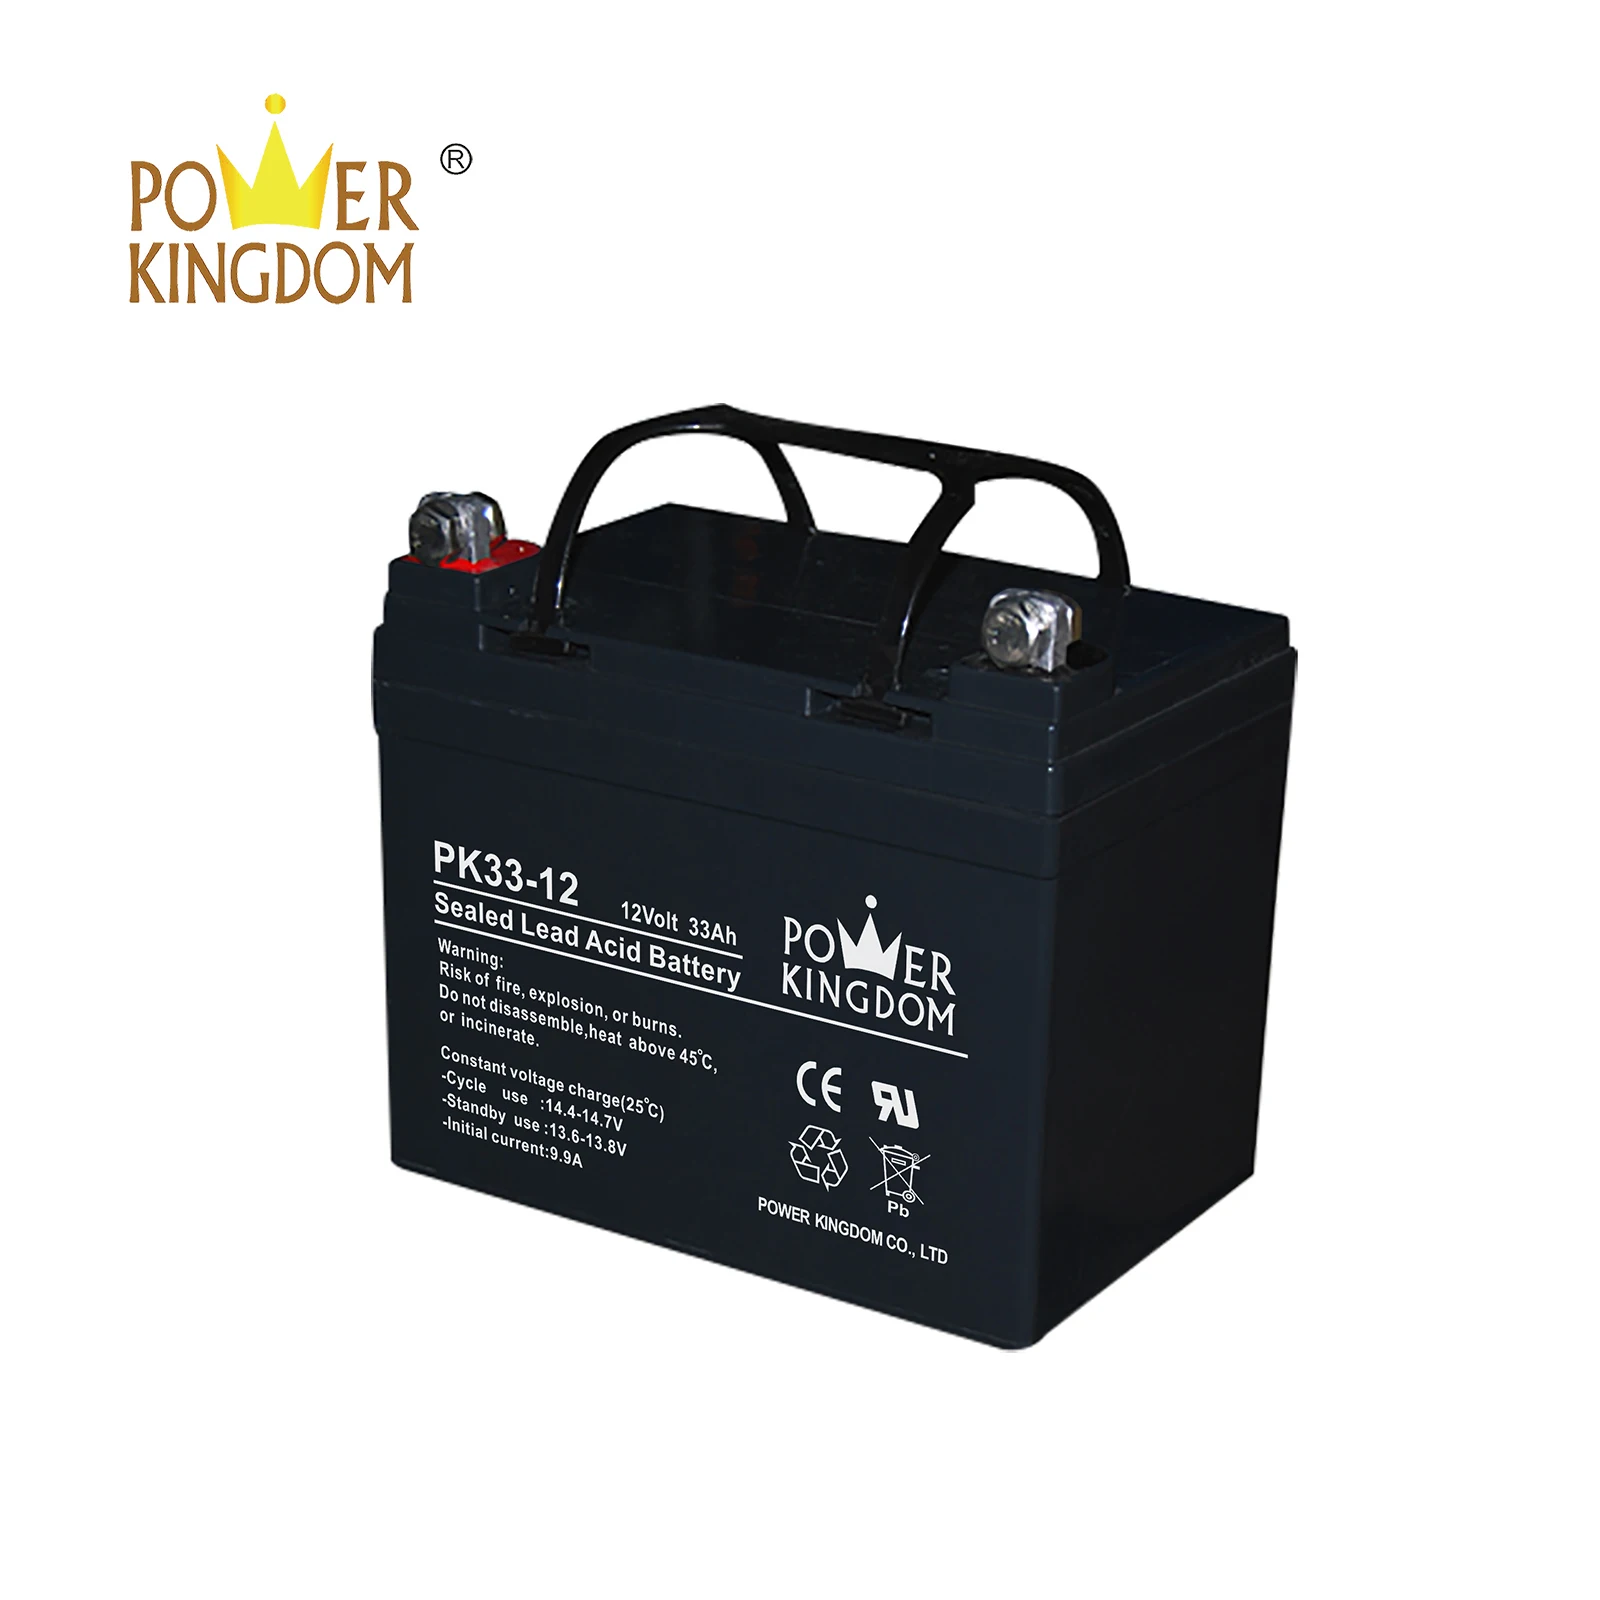 Power Kingdom Top are optima batteries gel company solar and wind power system